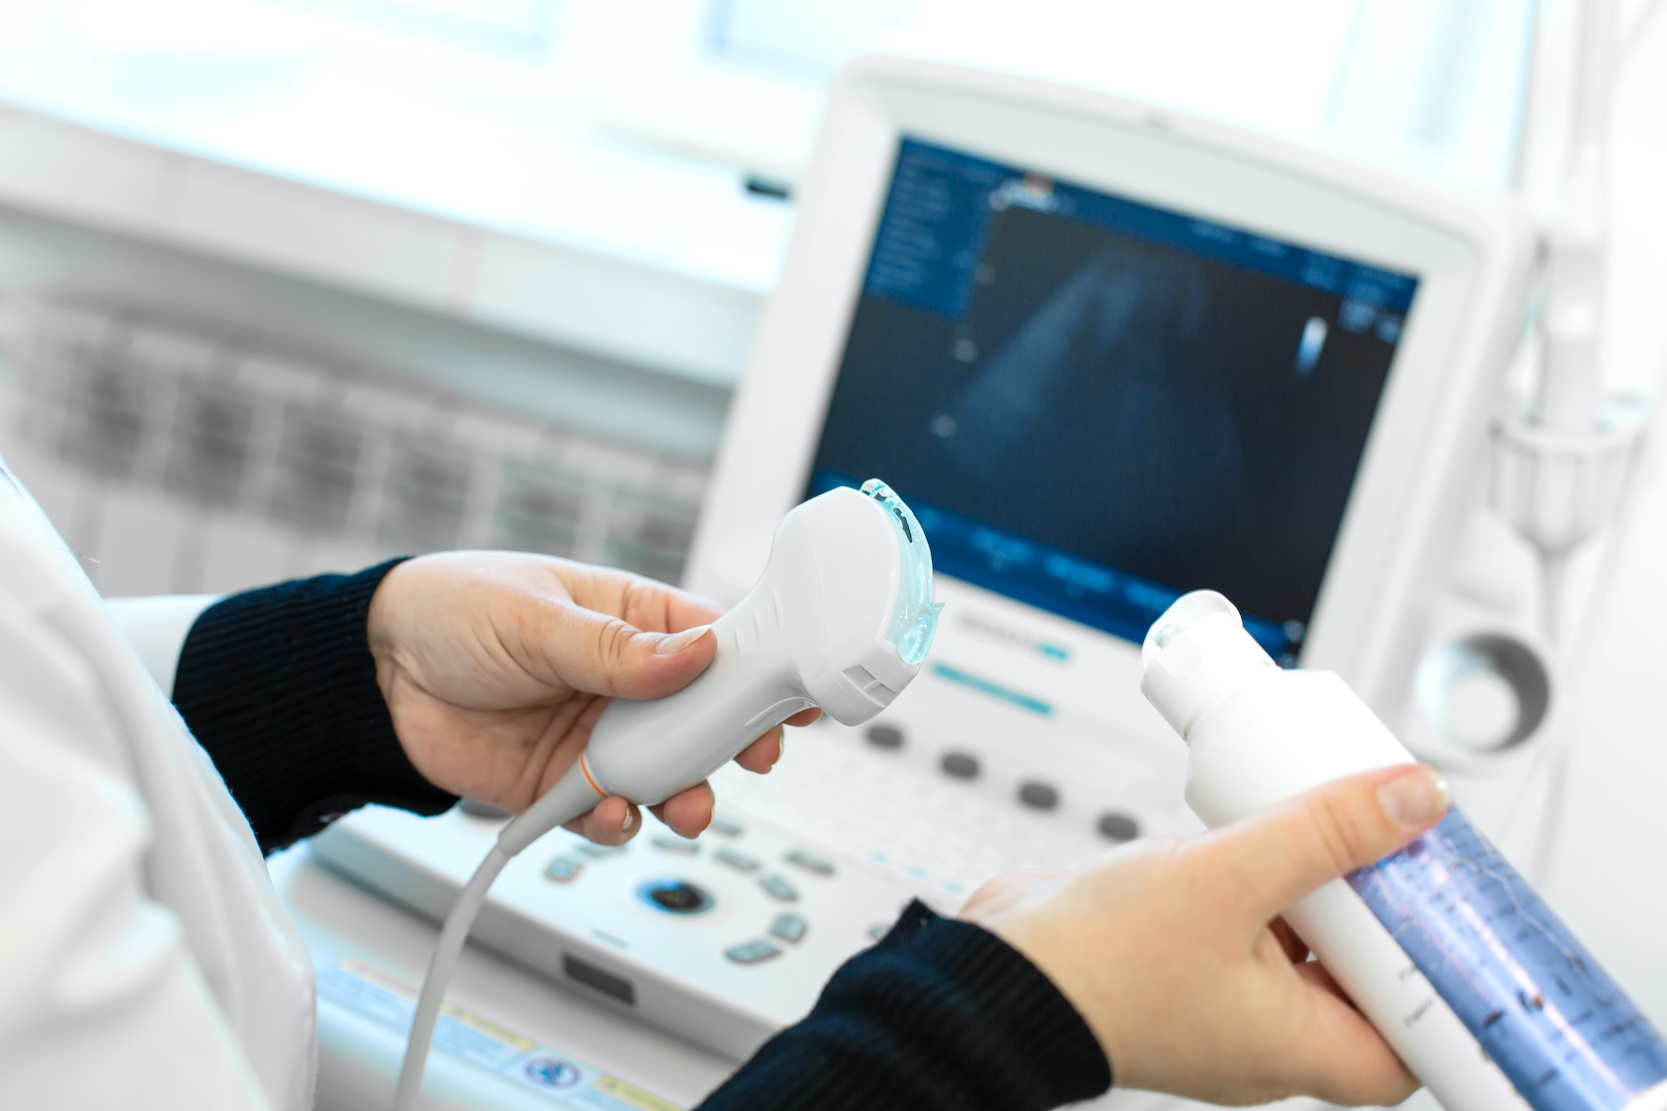 Doctor prepare an ultrasound machine for the diagnosis of a patient. Doctor puts media gel on an ultrasound transducer